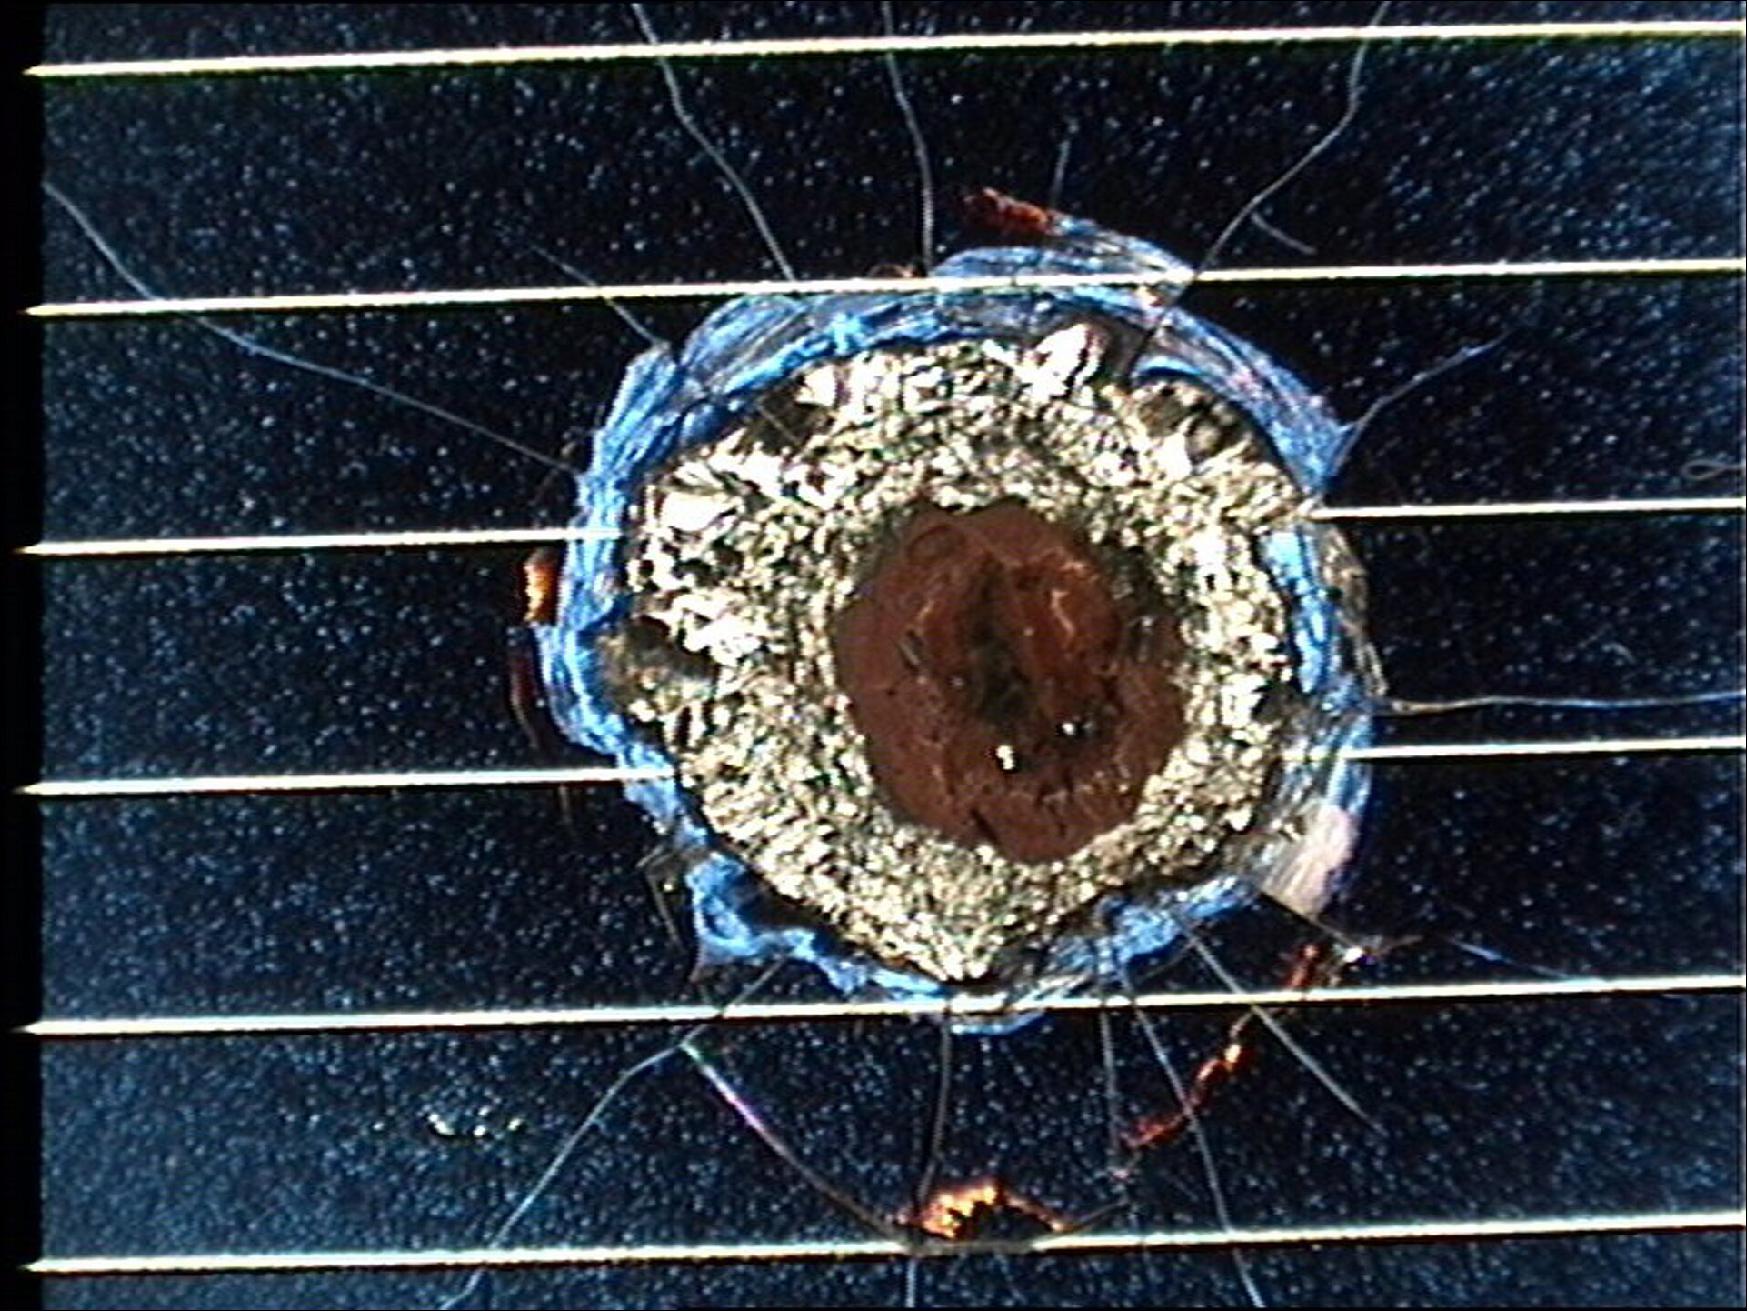 Figure 64: Hubble solar cell impact damage. Post-flight analysis of an impact crater on one of the solar wings deployed by the Space Shuttle Endeavour in 1993 and retrieved by Space Shuttle Columbia in 2002 (image credit: ESA)